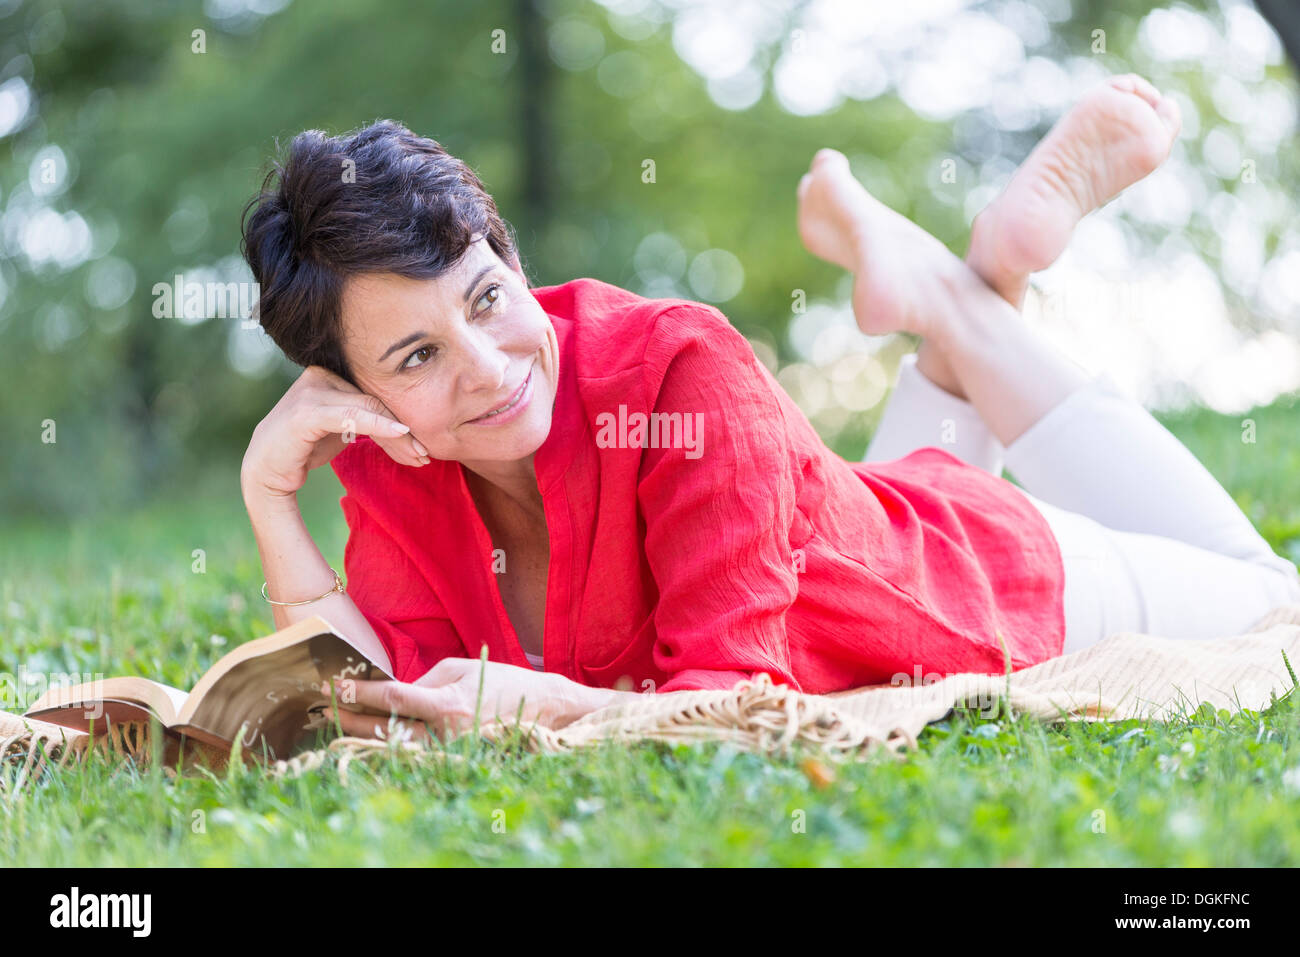 Mature woman lying on grass and reading book Stock Photo